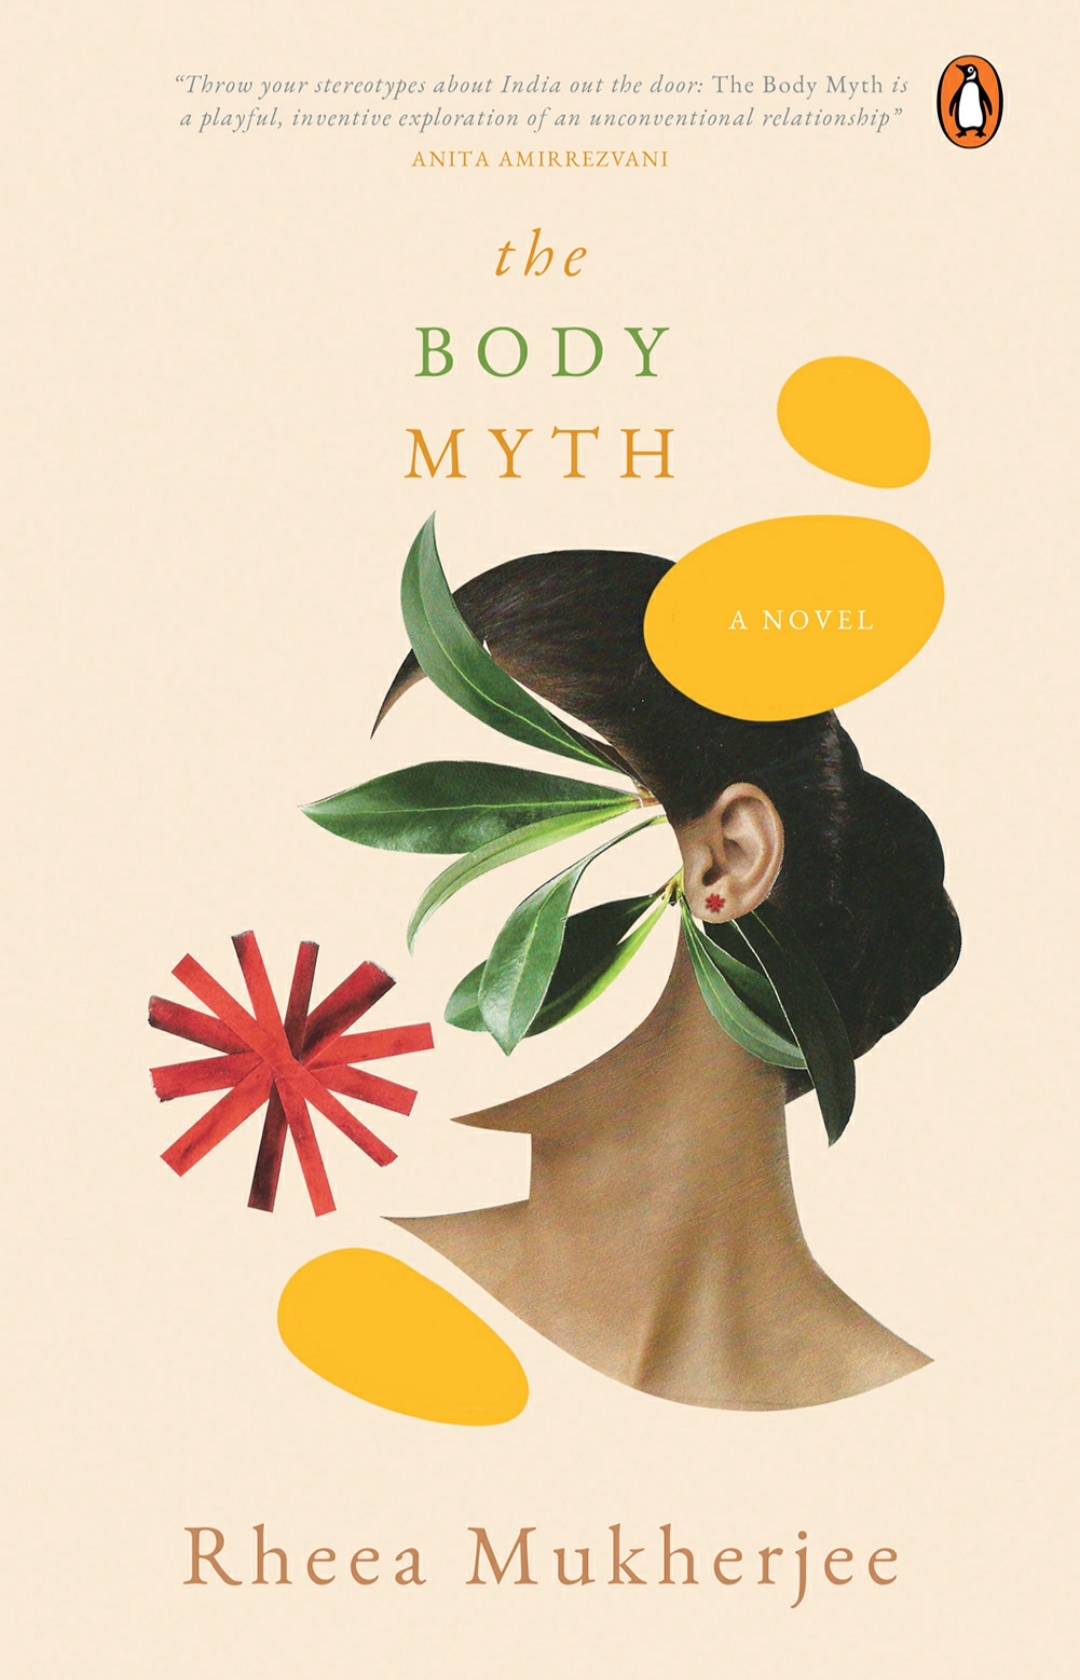 Rheea Mukherjee on "The Body Myth": 'This book was a response to my analysis about notions of love, sexuality, morality, and social privilege'